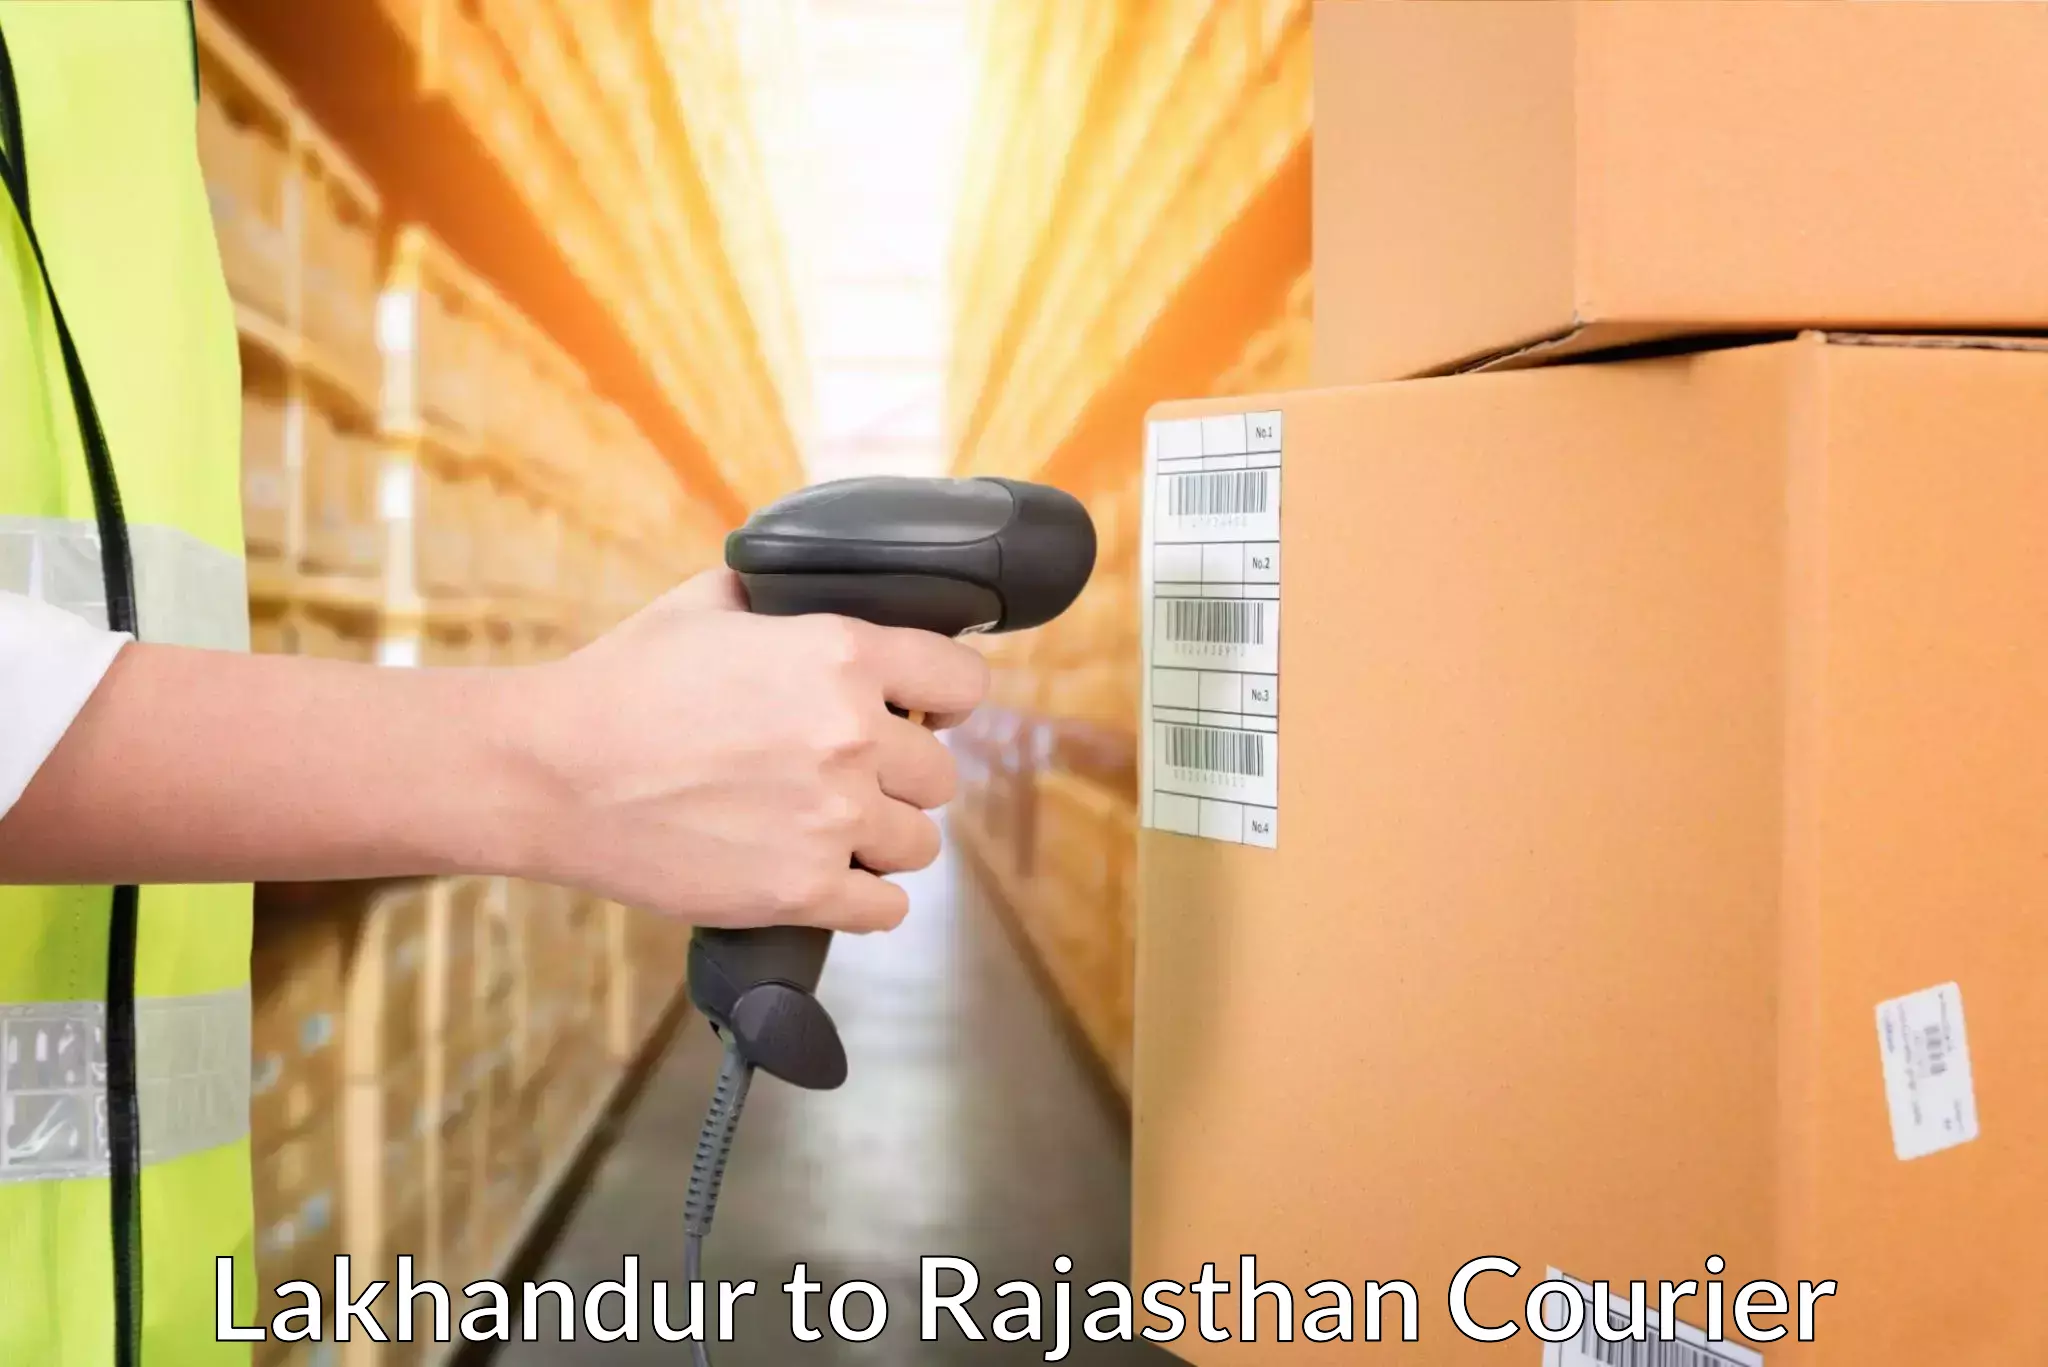 Courier service booking Lakhandur to Ras Pali